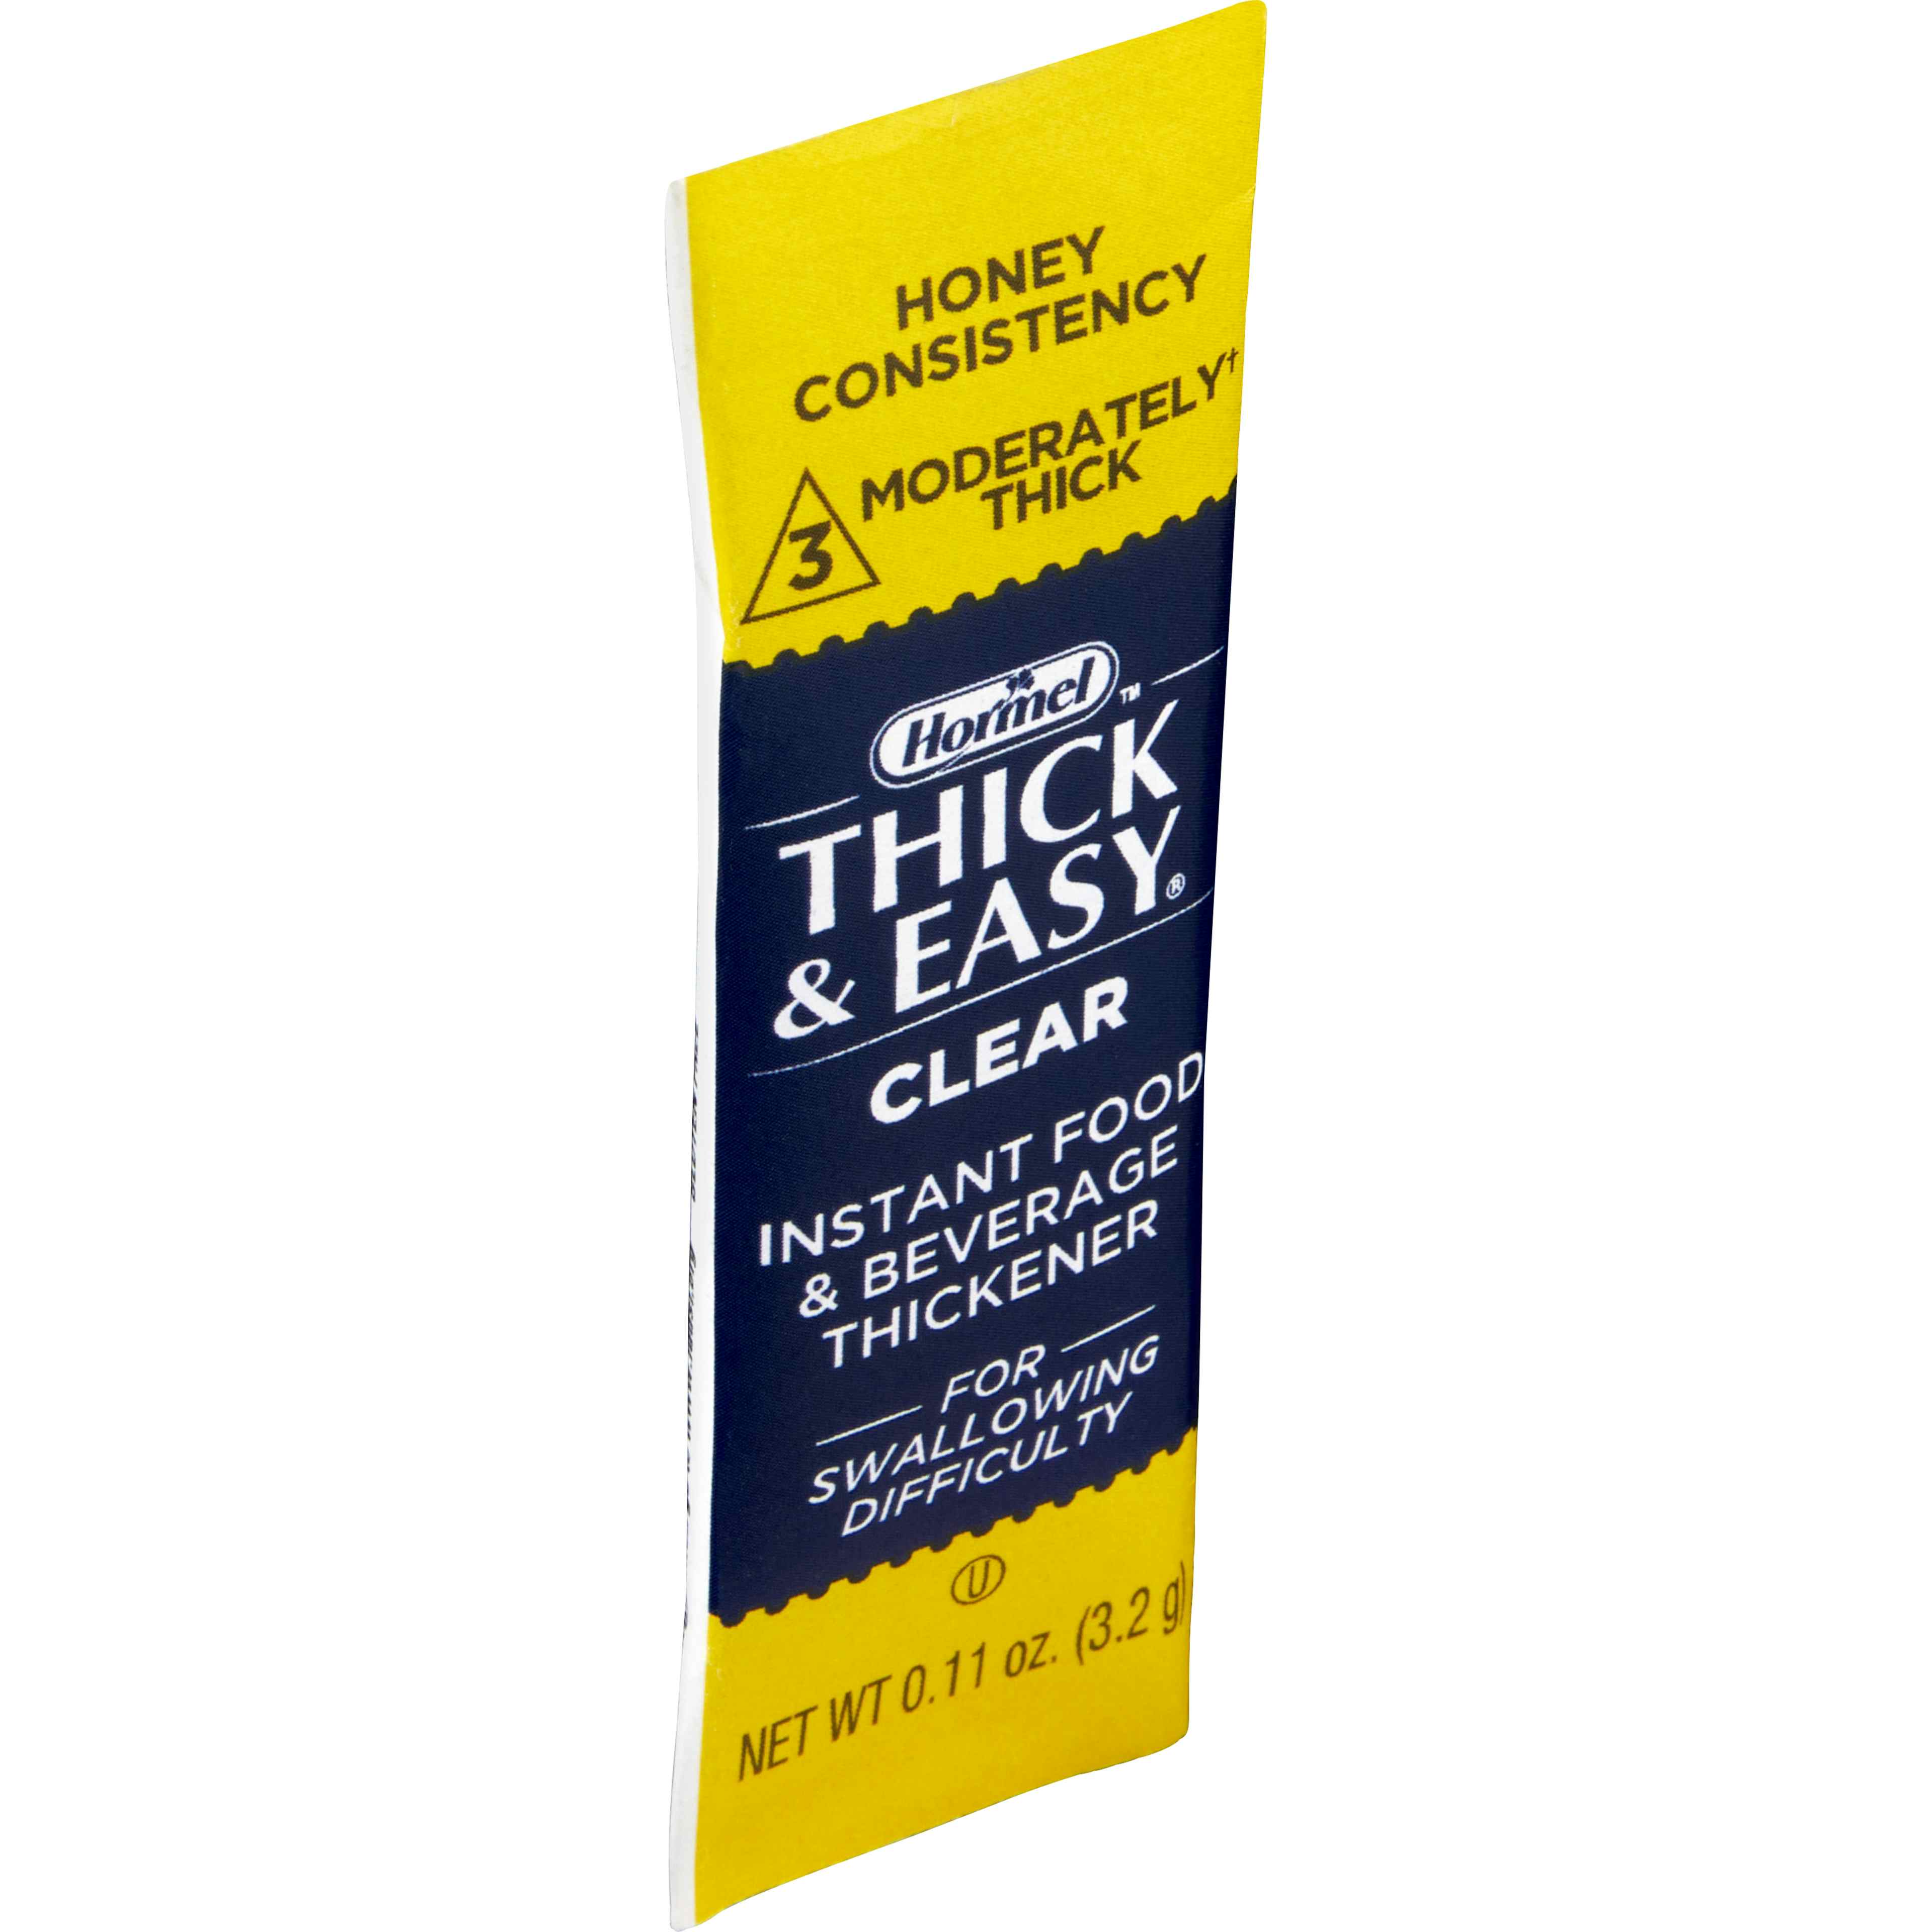 Thick & Easy Clear Food & Beverage Thickeners, 3.2 Gram Packet of Powder